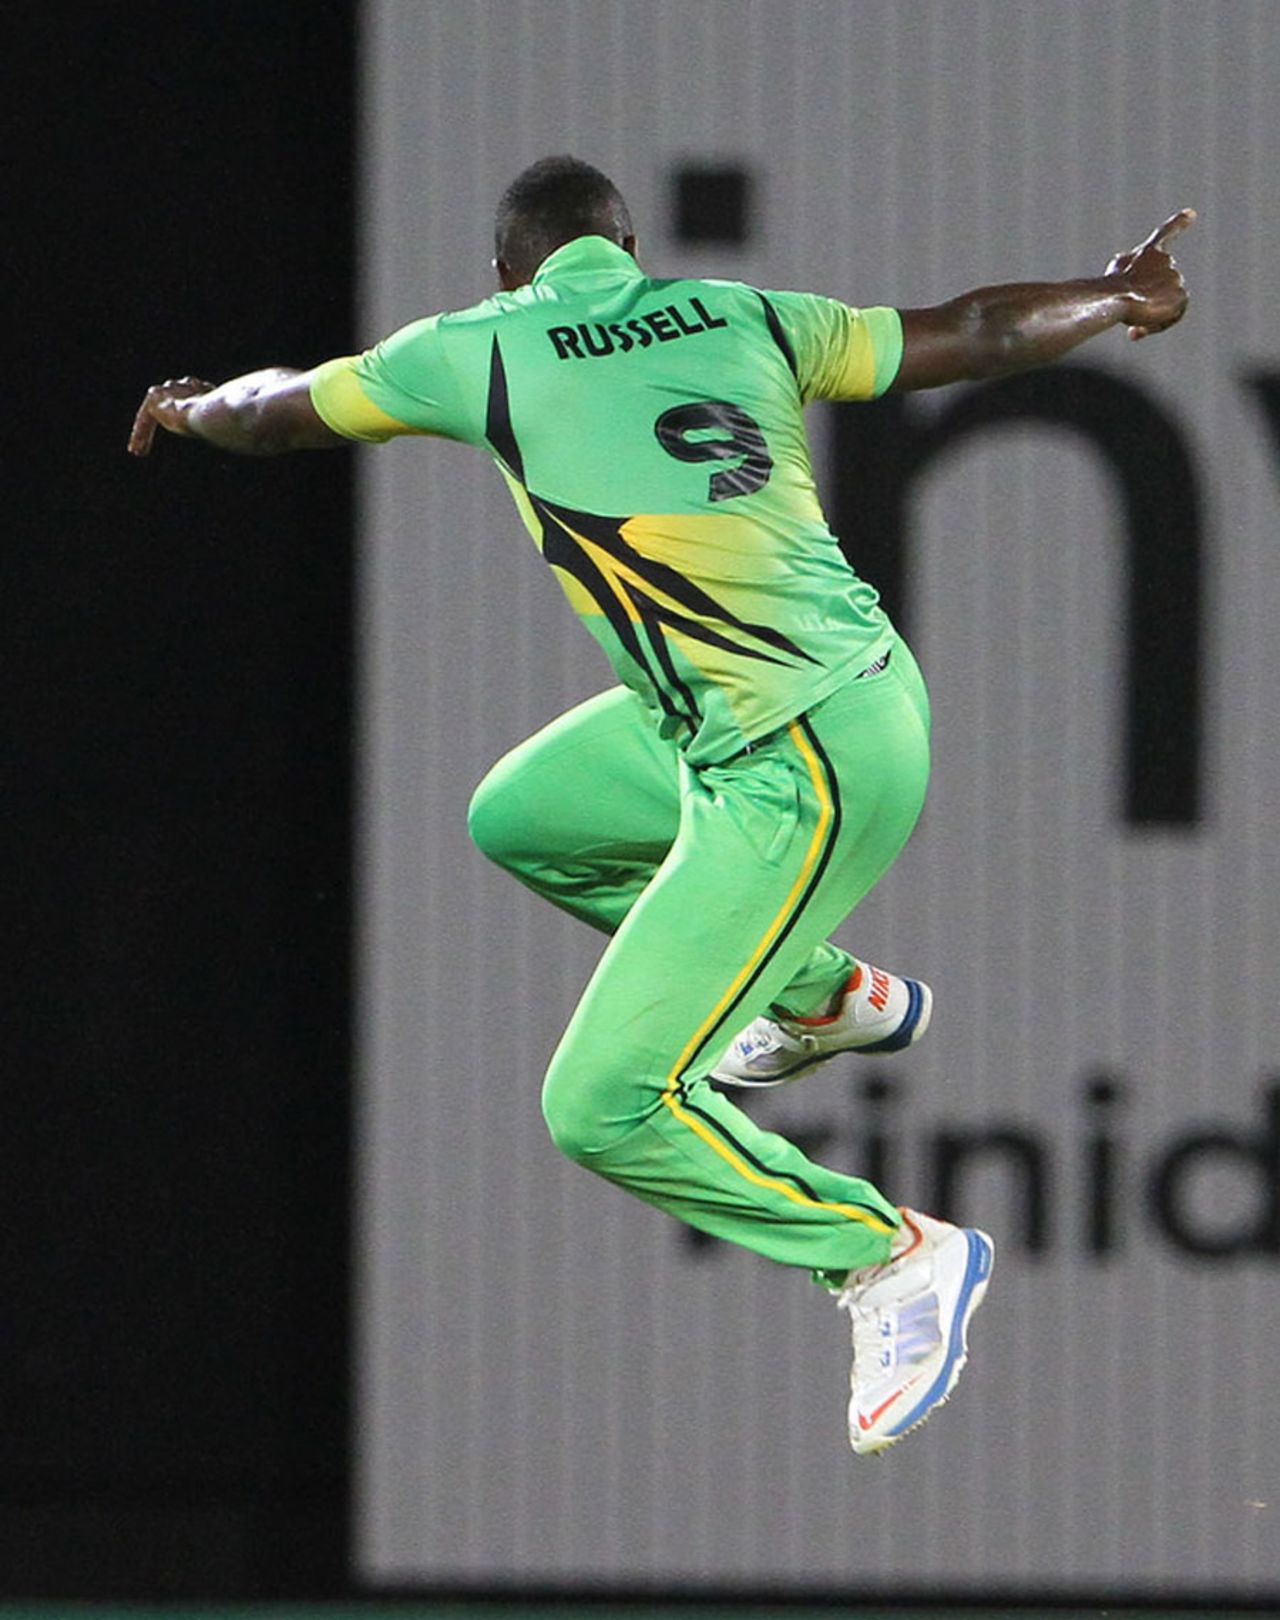 Andre Russell leaps off his feet after taking a wicket, Jamaica v Guyana, Nagico Super50, Zone A, Port of Spain, February 8, 2014